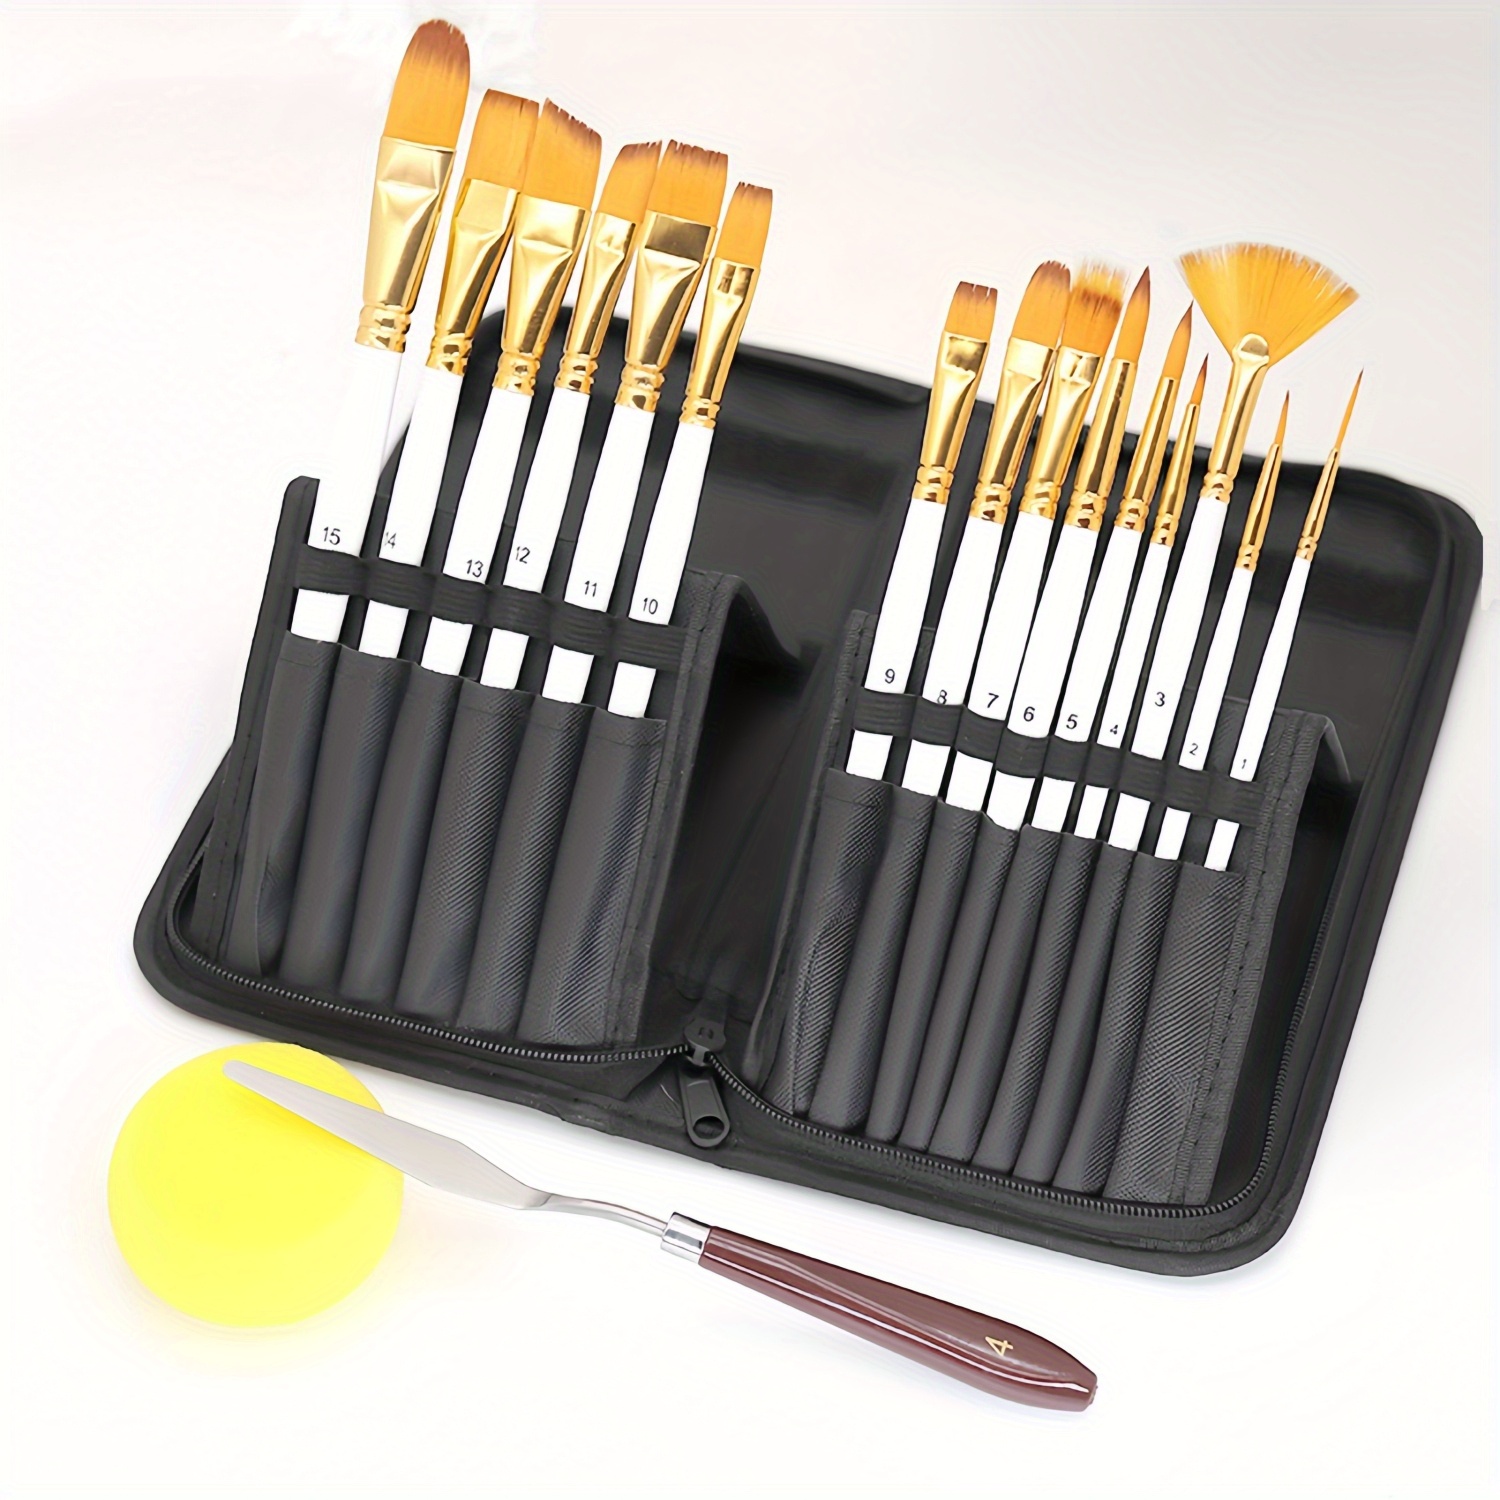 

Paint Brush Set For Artists And Beginners, Includes 15pcs Brushes, Pop-up Carrying Case With Palette Knife And 1pcs Round Sponges, For Acrylic, Oil, Watercolor And Gouache Painting.